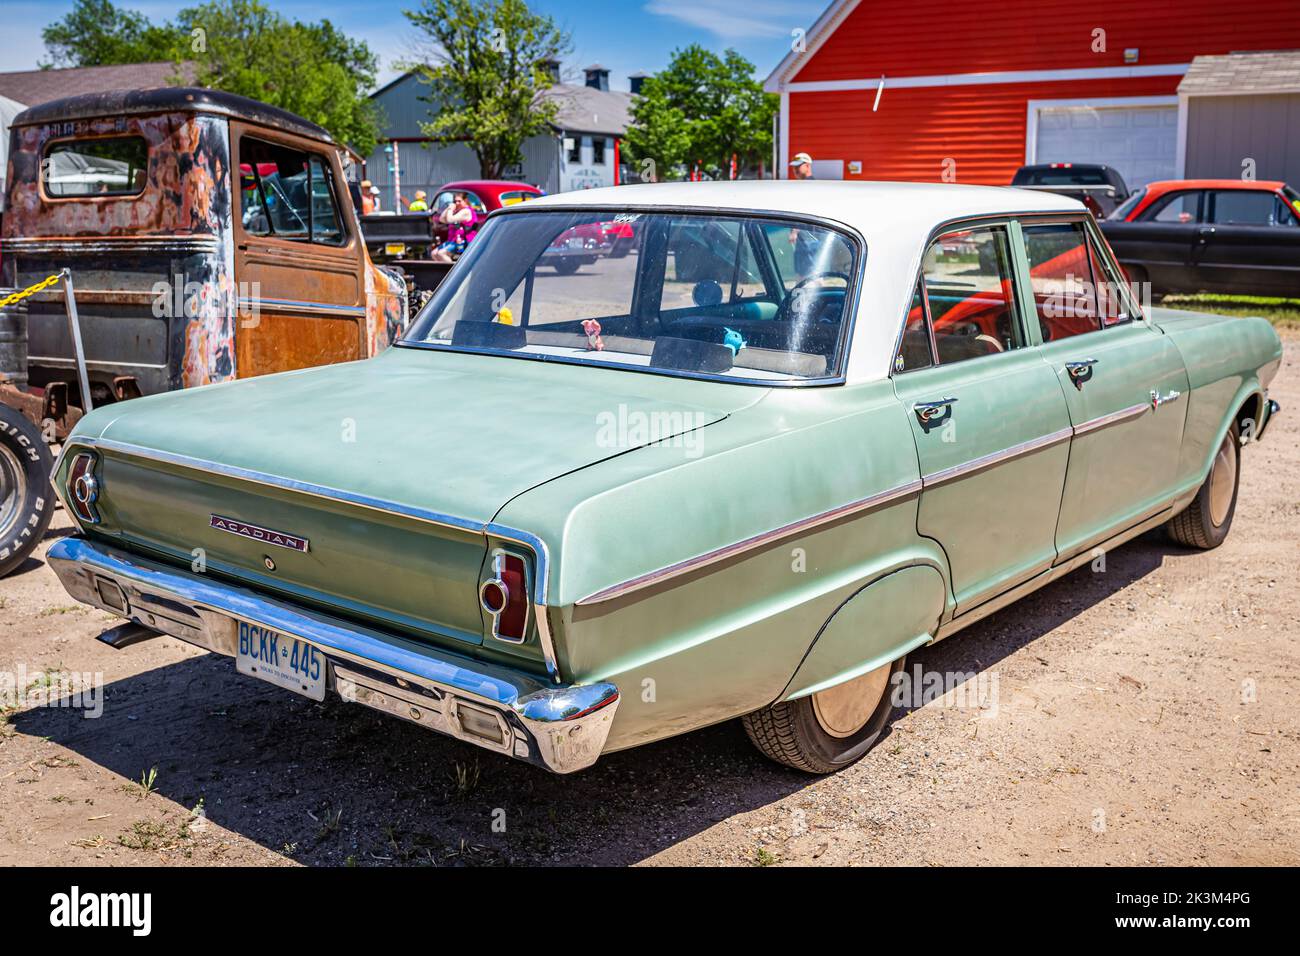 Falcon Heights, MN - June 18, 2022: High perspective rear corner view of a 1963 Acadian Invader 4 Door Sedan at a local car show. Stock Photo